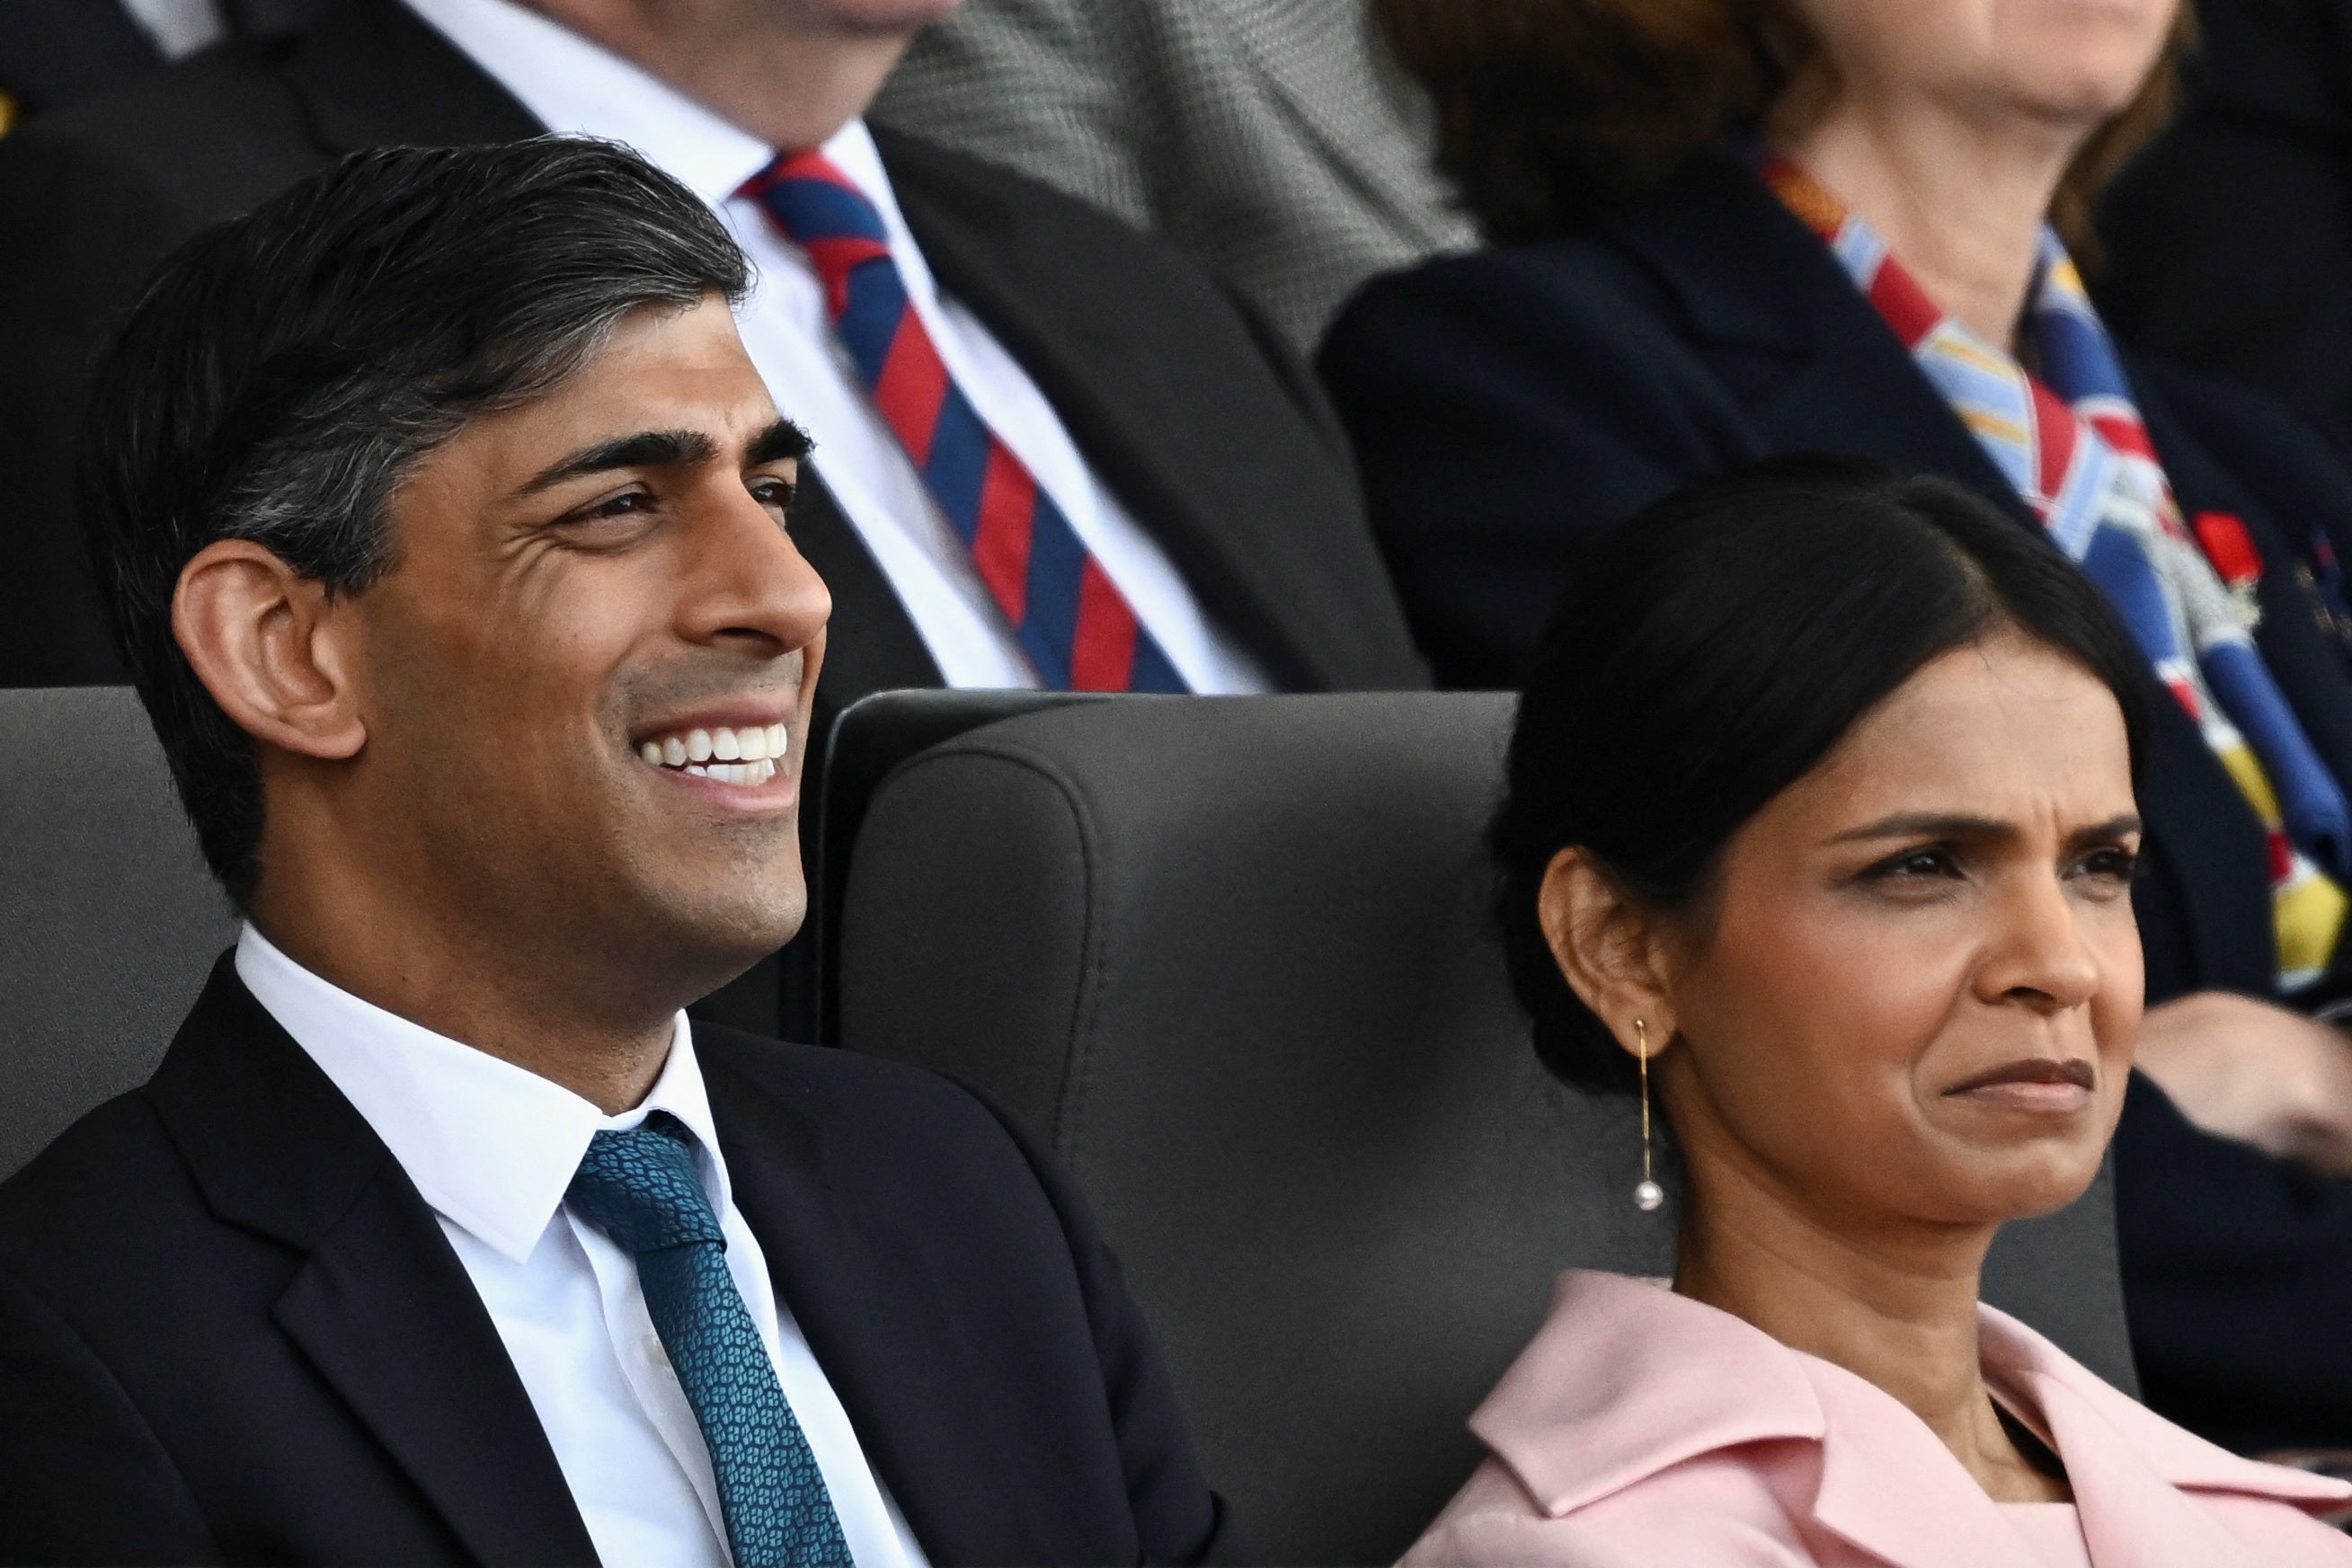 Prime Minister Rishi Sunak and his wife Akshata Murty at the UK’s national commemorative event for the 80th anniversary of D-Day (Dylan Martinez/PA)